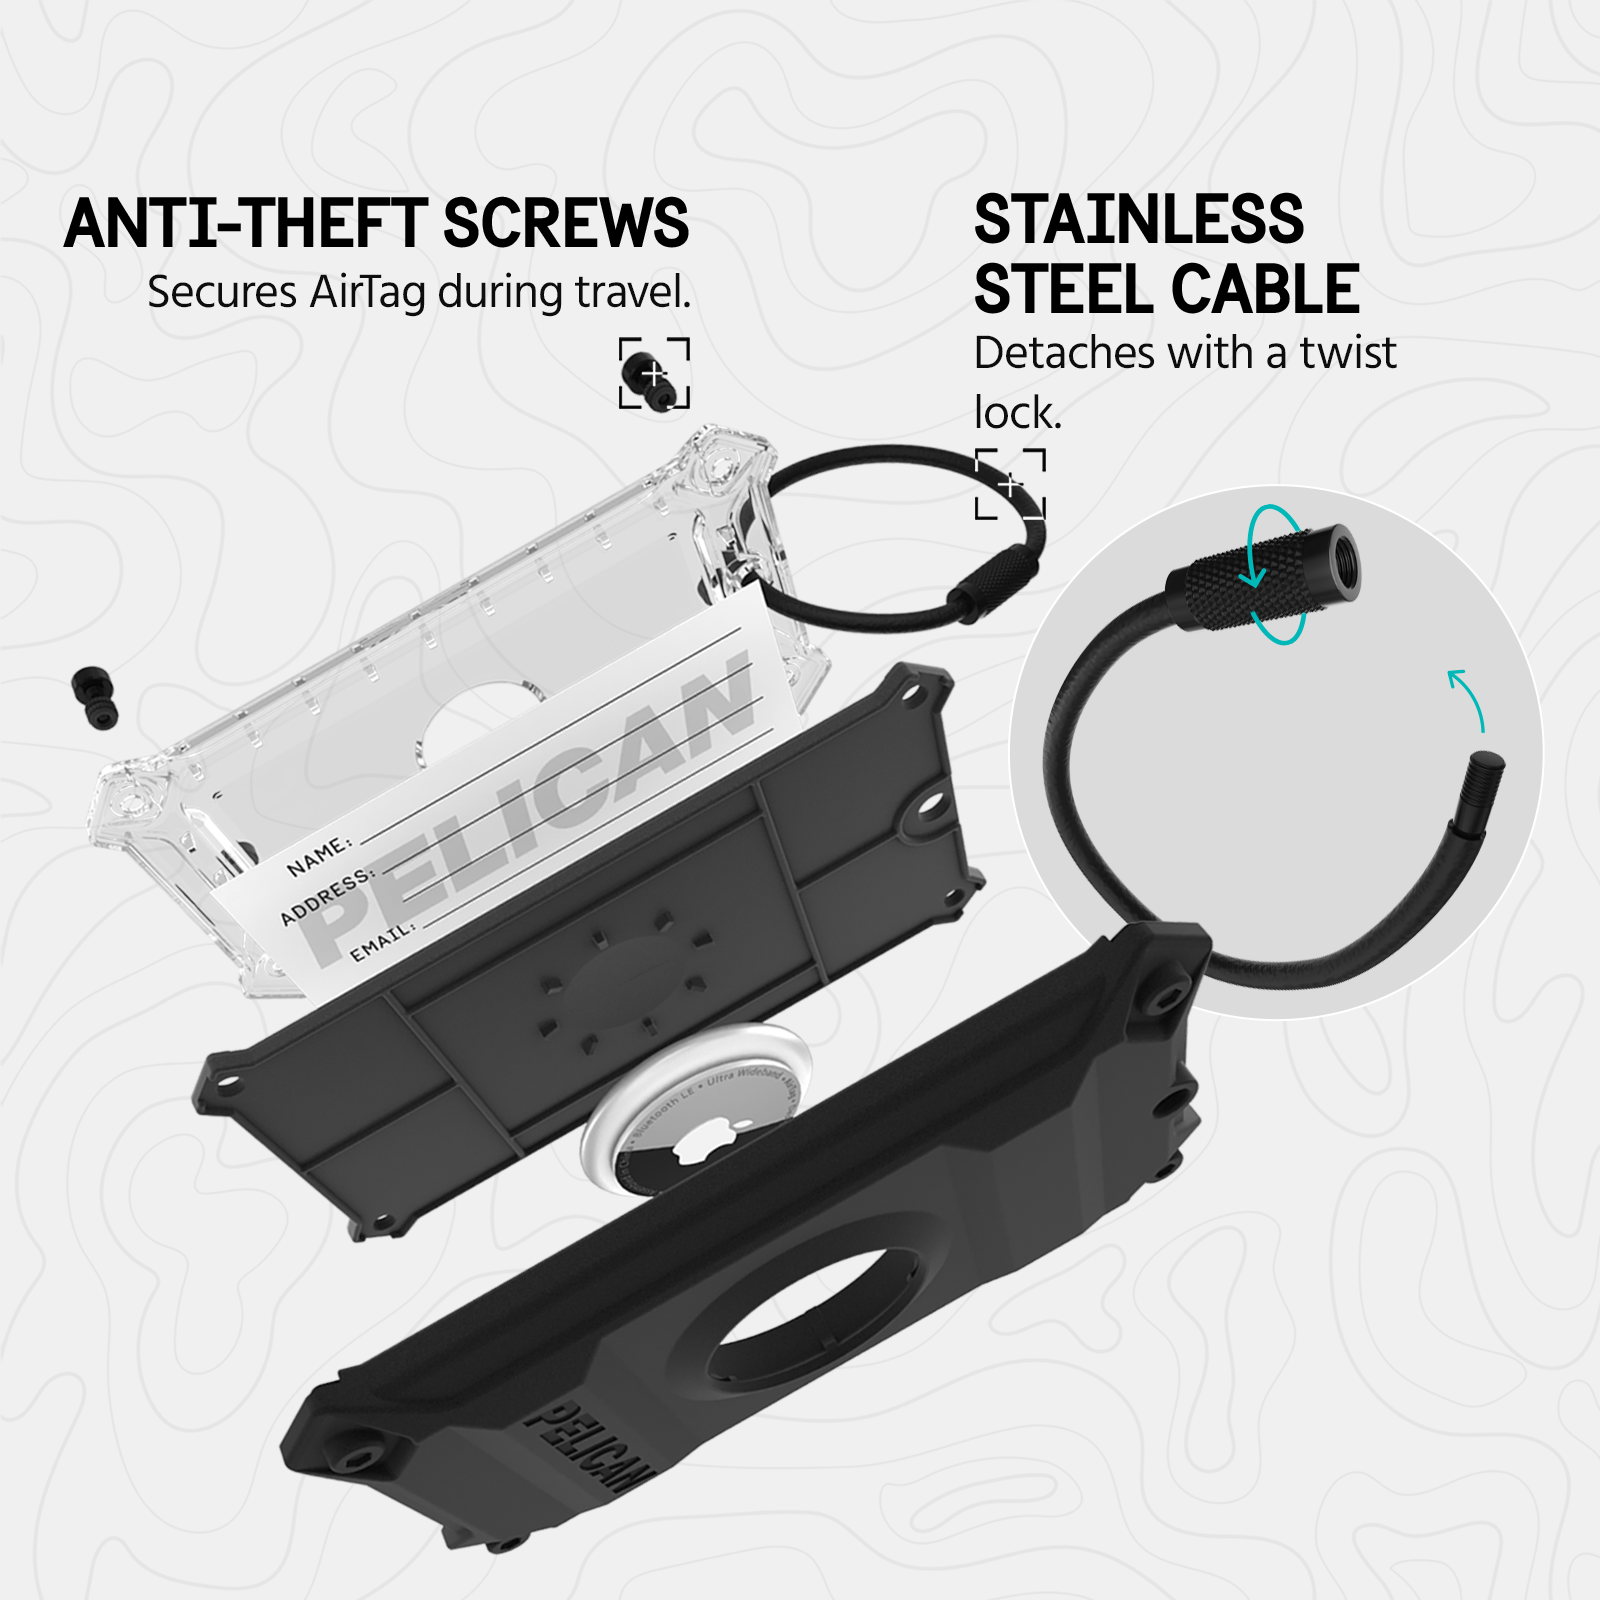 ANTI-THEFT SCREWS SECURES AIRTAG DURING TRAVEL. STAINLESS STEEL CABLE. DETACHES WITH A TWIST LOCK,